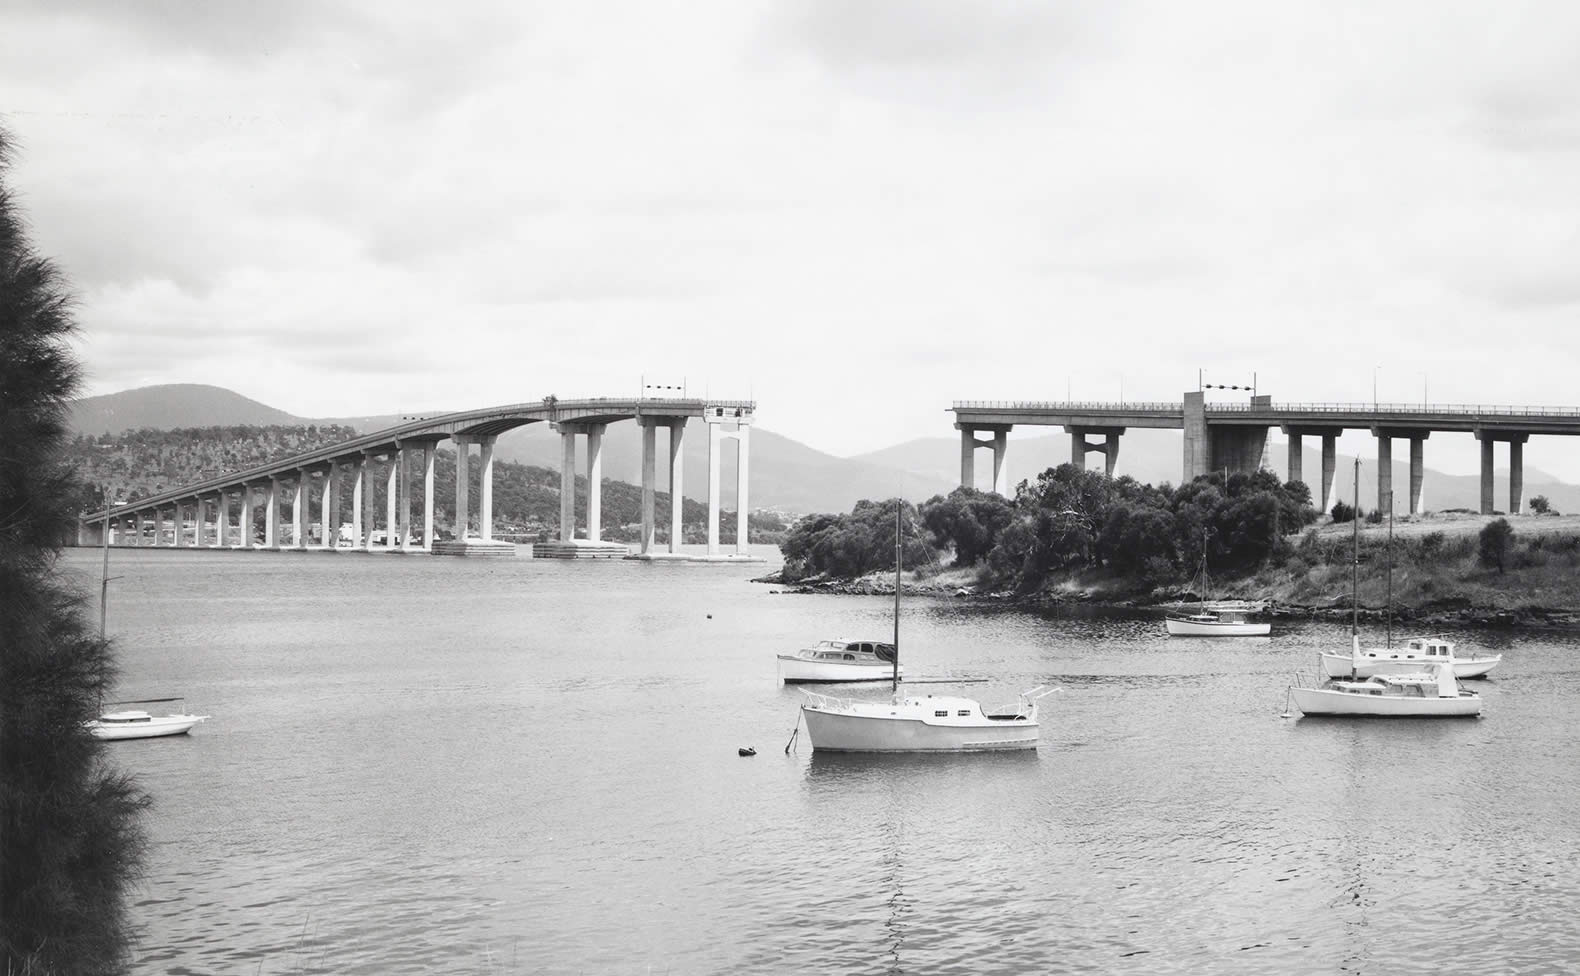 View of the Tasman Bridge from Kalatie Road Montagu Bay looking toward the Powder Jetty over Cuthbertson’s Boat shed (1975). Photo: Tasmanian Archive and Heritage Office.